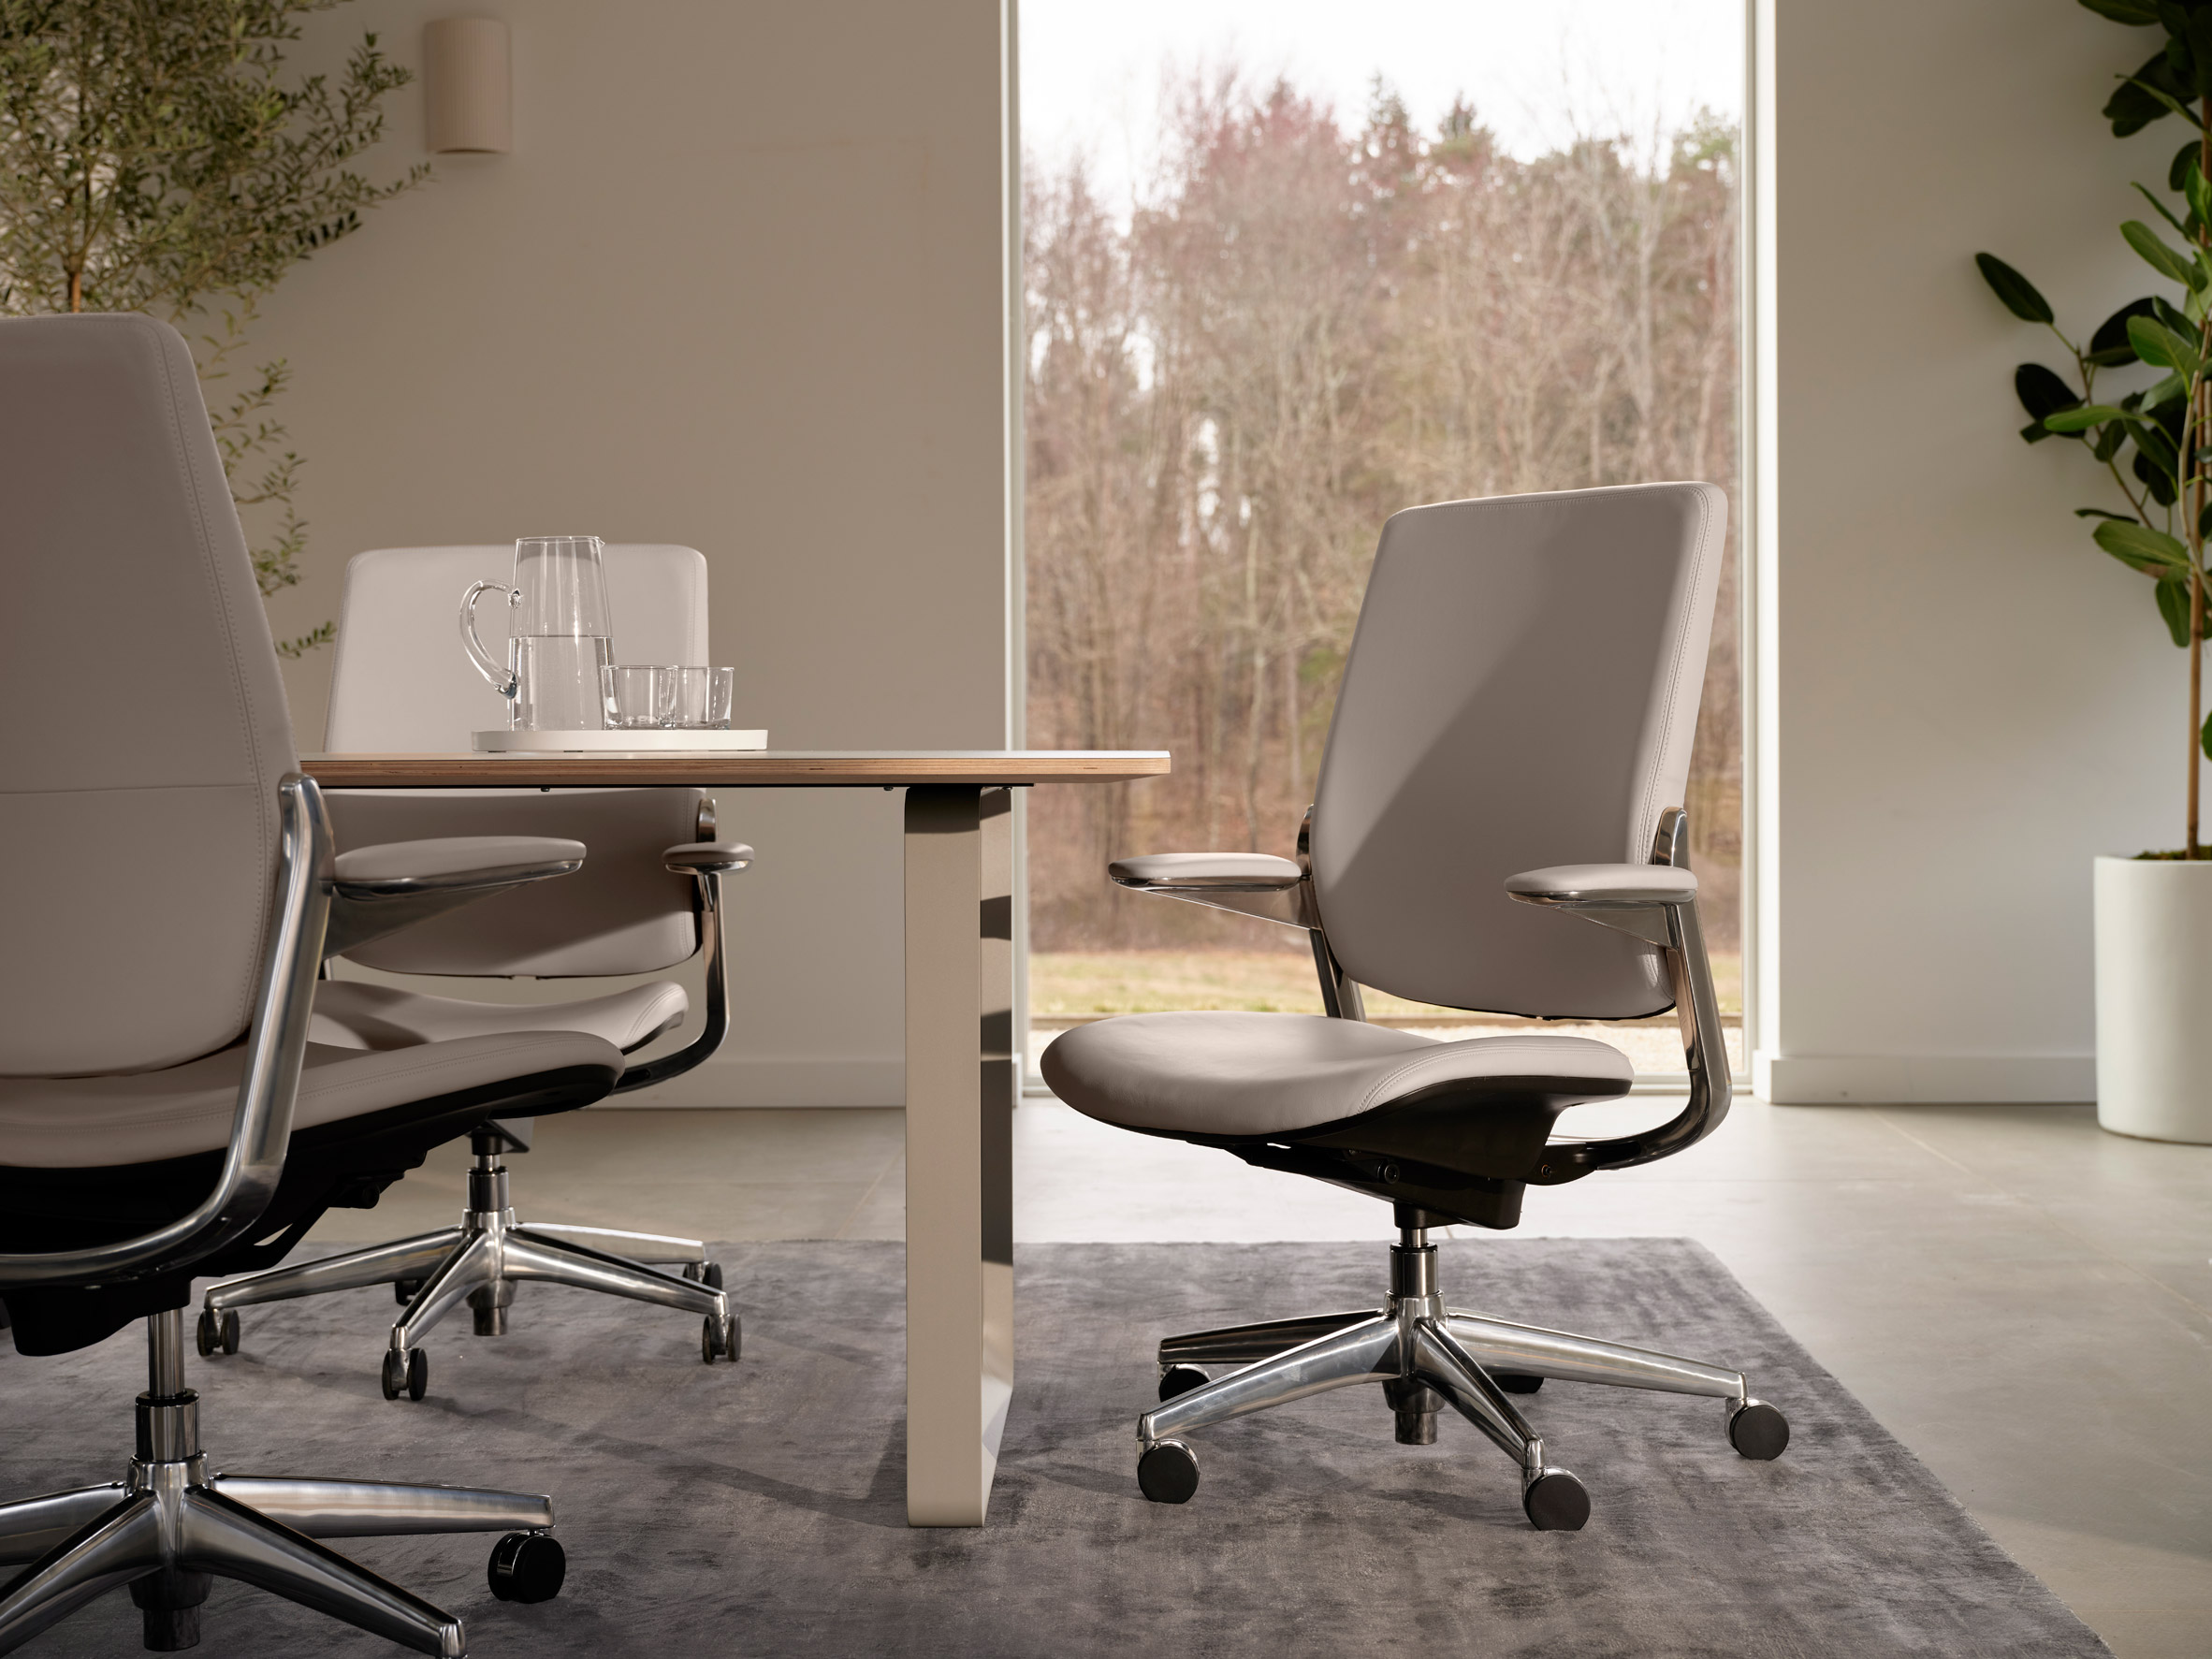 Leather-upholstered office chair from Humanscale